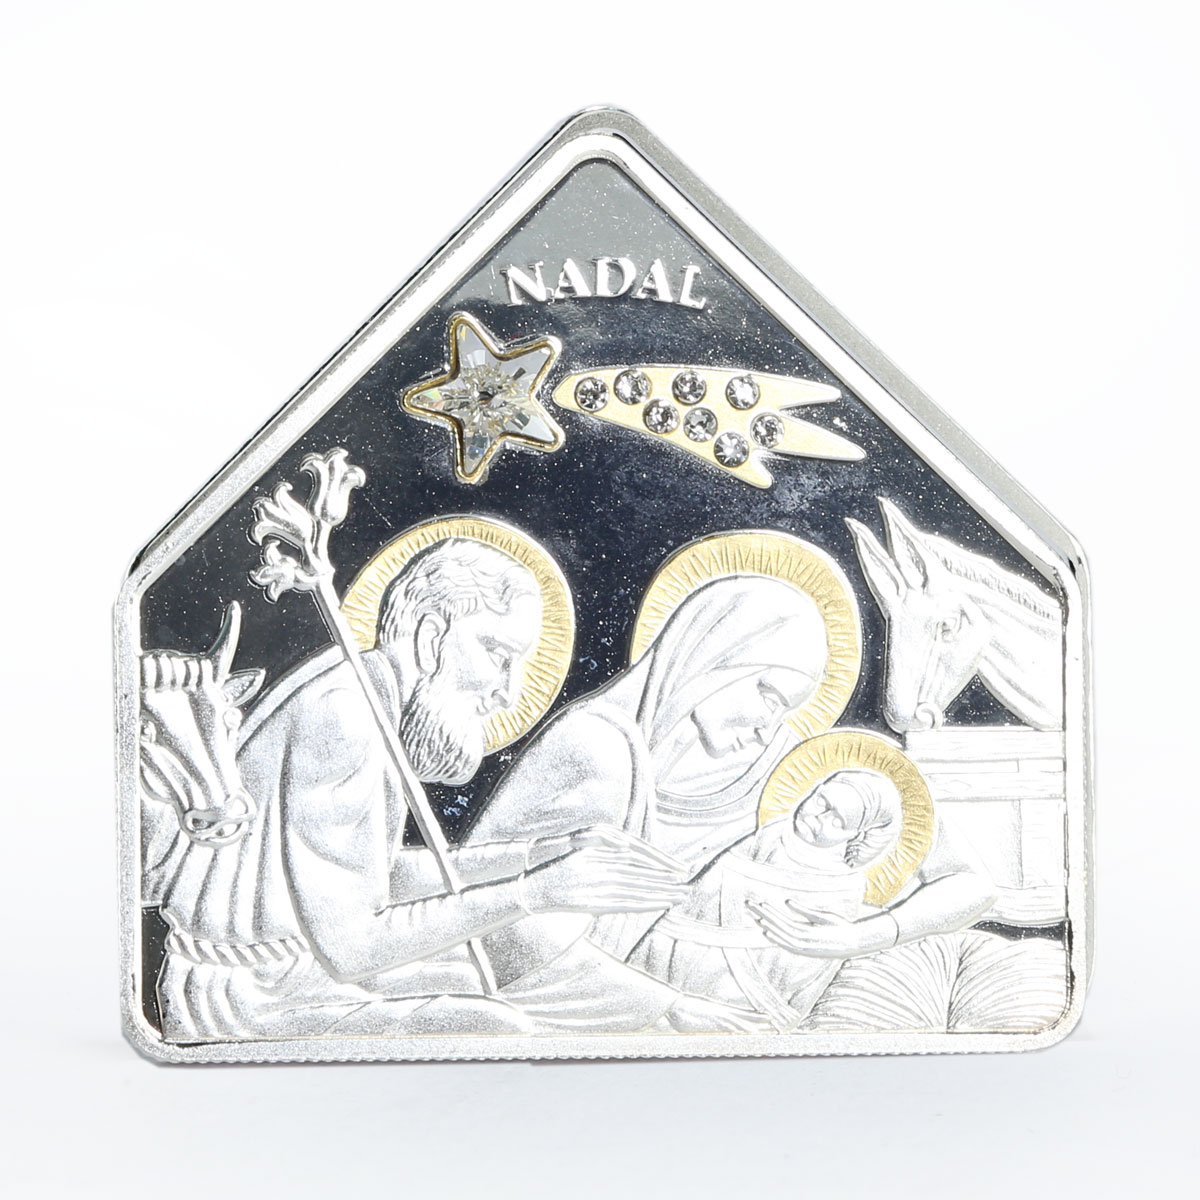 Andorra 10 diners Joseph and Maria Jesus Birth Christmas Star silver coin 2007